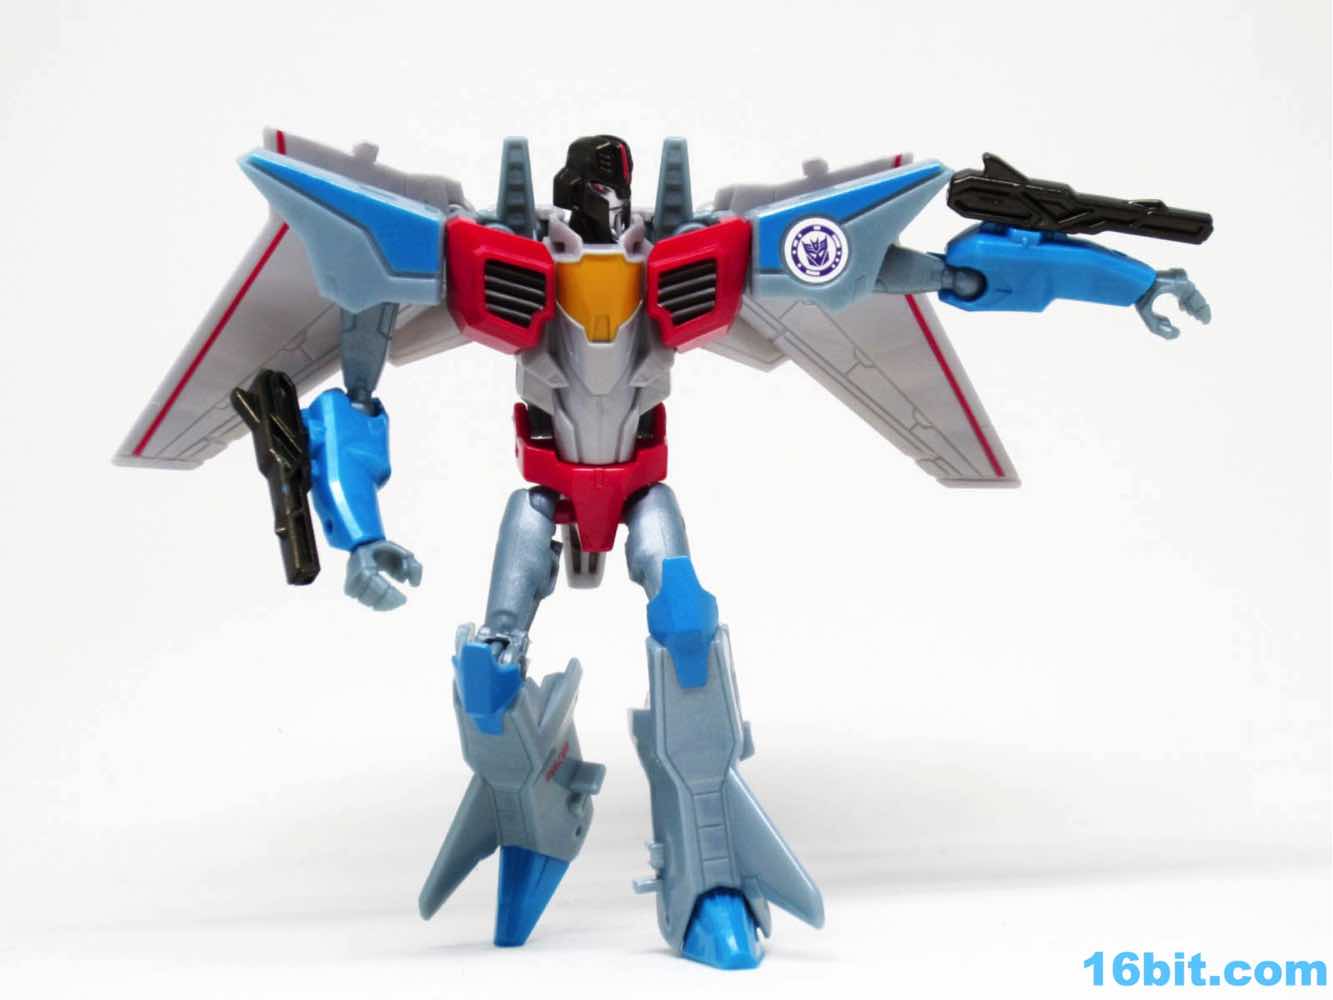 16bit.com Figure of the Day Review: Hasbro Transformers Robots in Disguise Clash of the Transformers Warrior Class Starscream Action